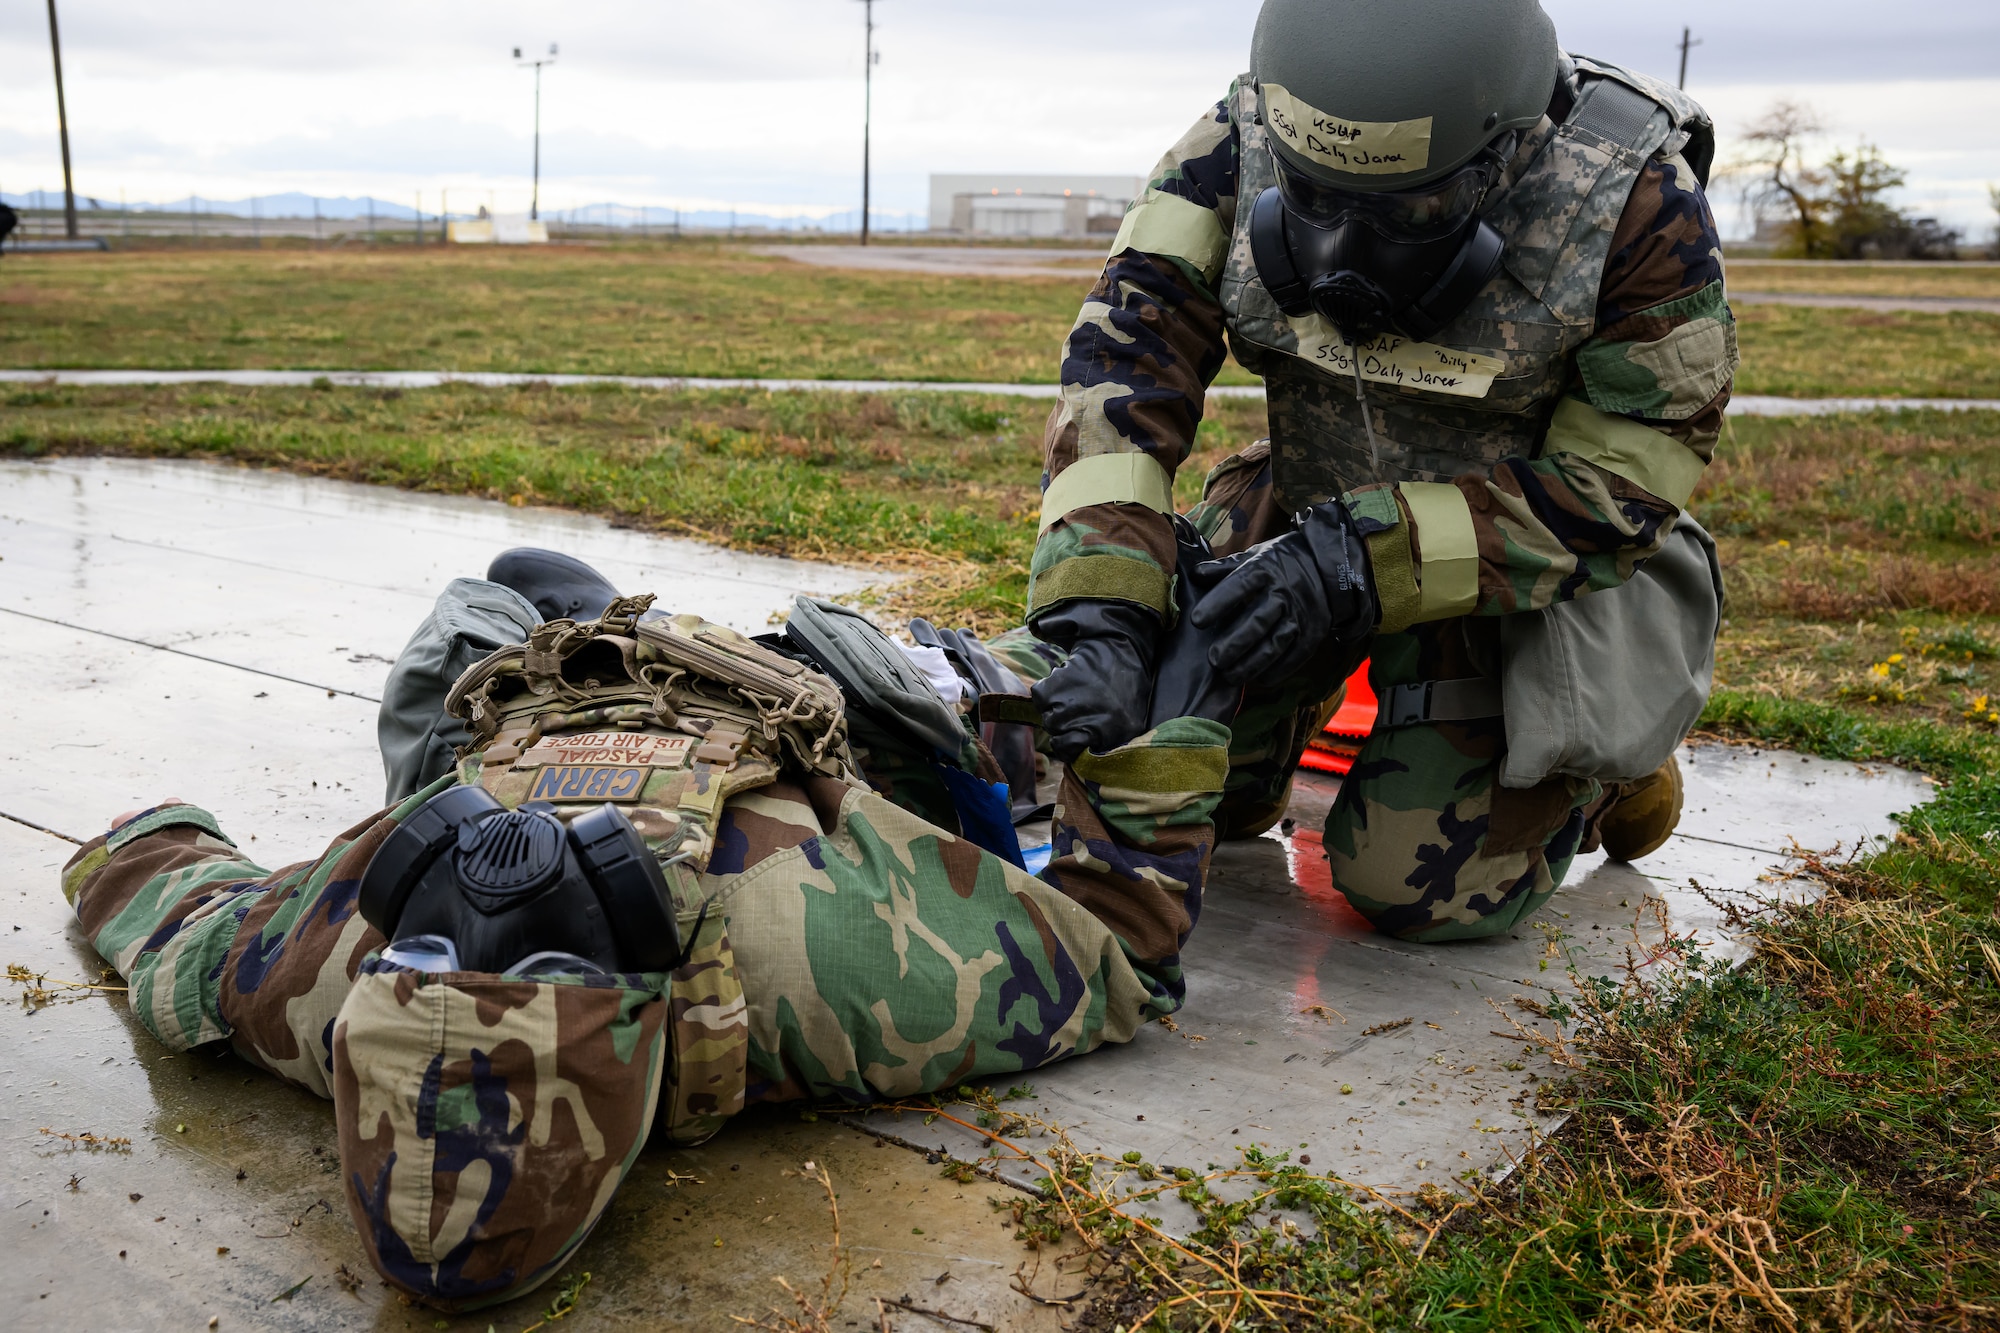 one Airmen tends to another while wearing chemical warfare suits.